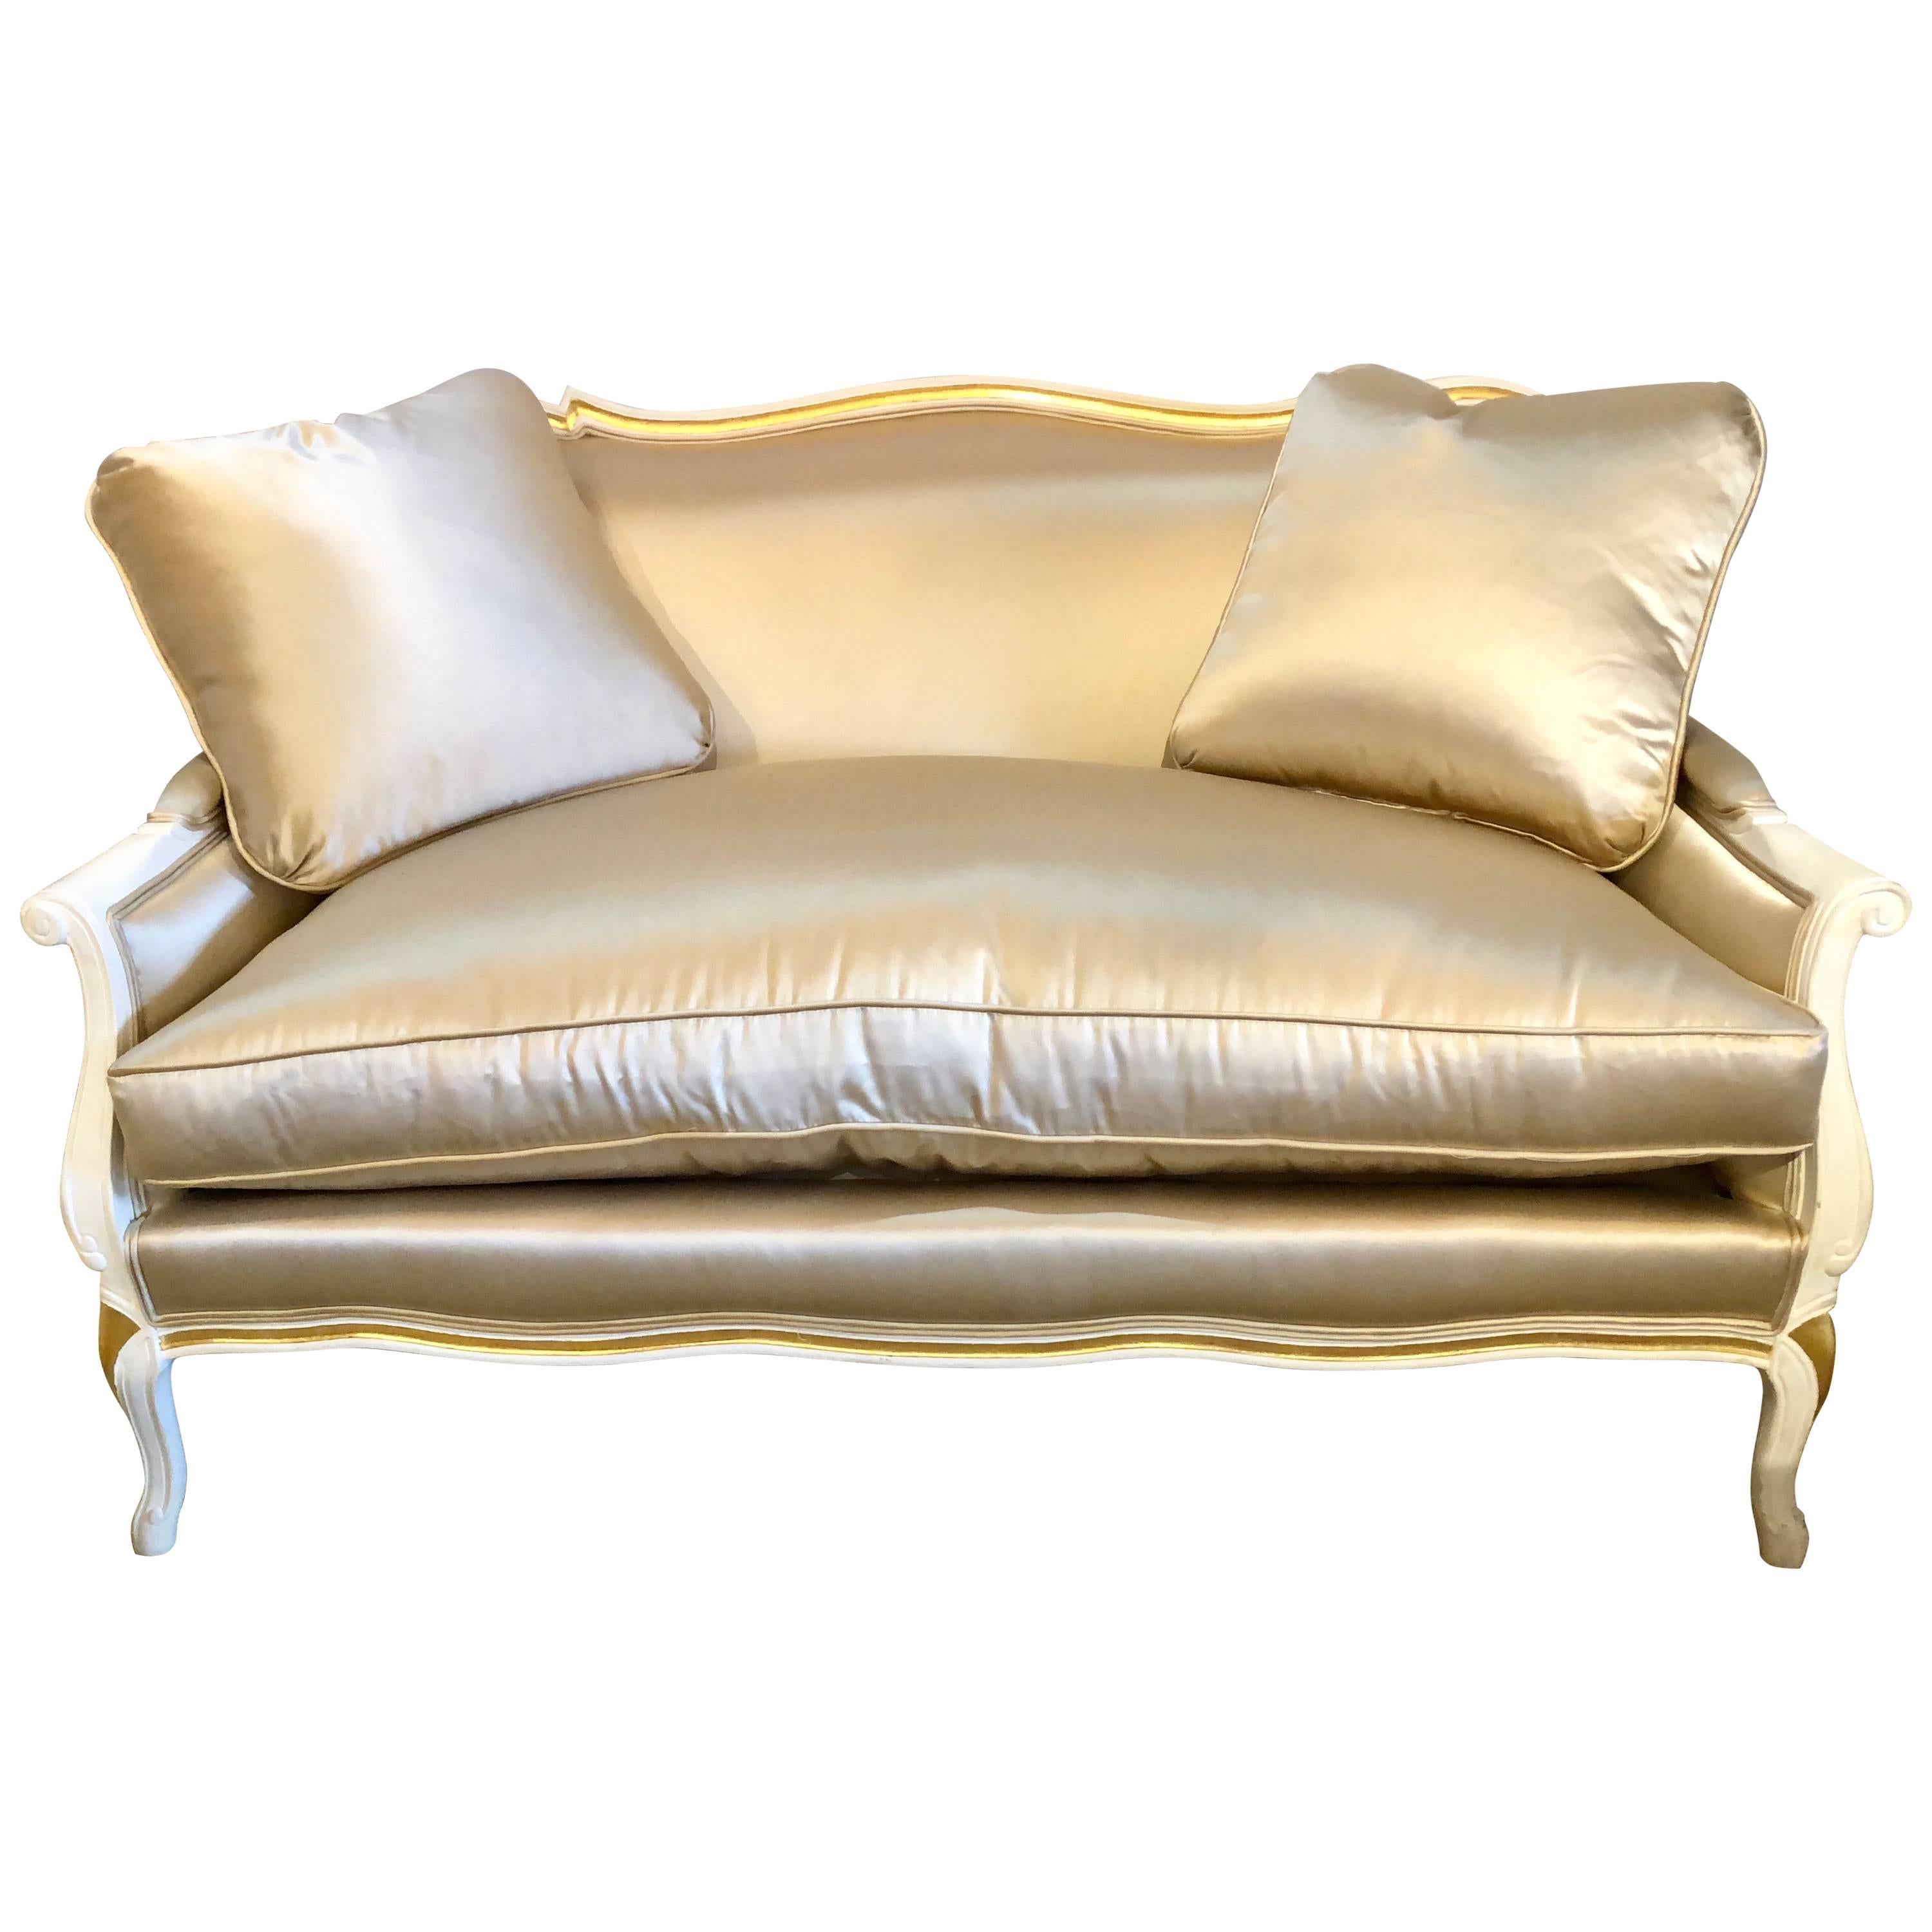 Gilt and Paint Decorated Settee / Loveseat in a Fine Satin Upholstery